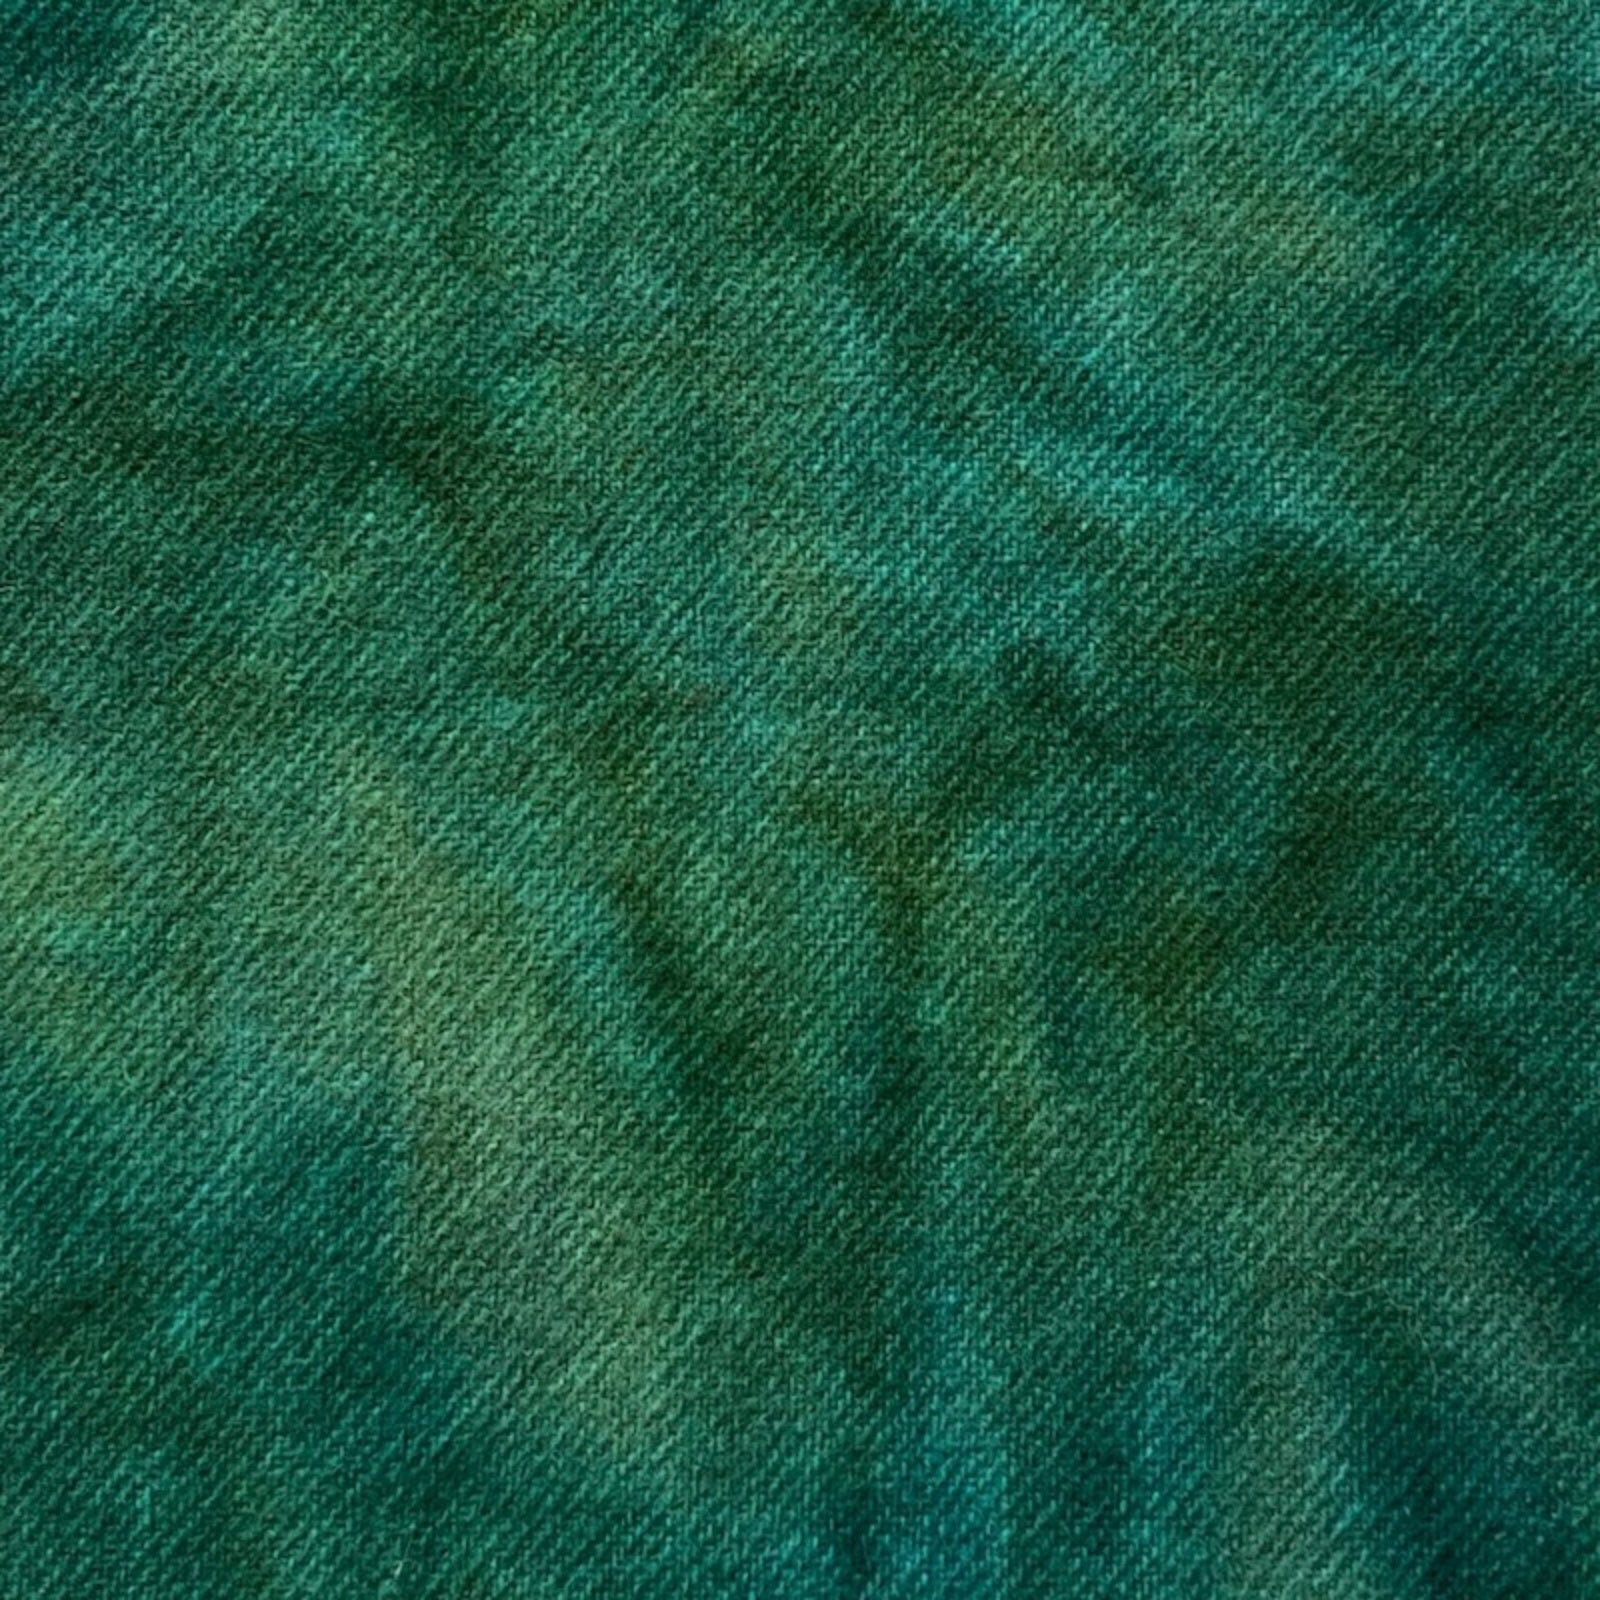 Caribbean Sea - Colorama Hand Dyed Wool - Offered by HoneyBee Hive Rug Hooking